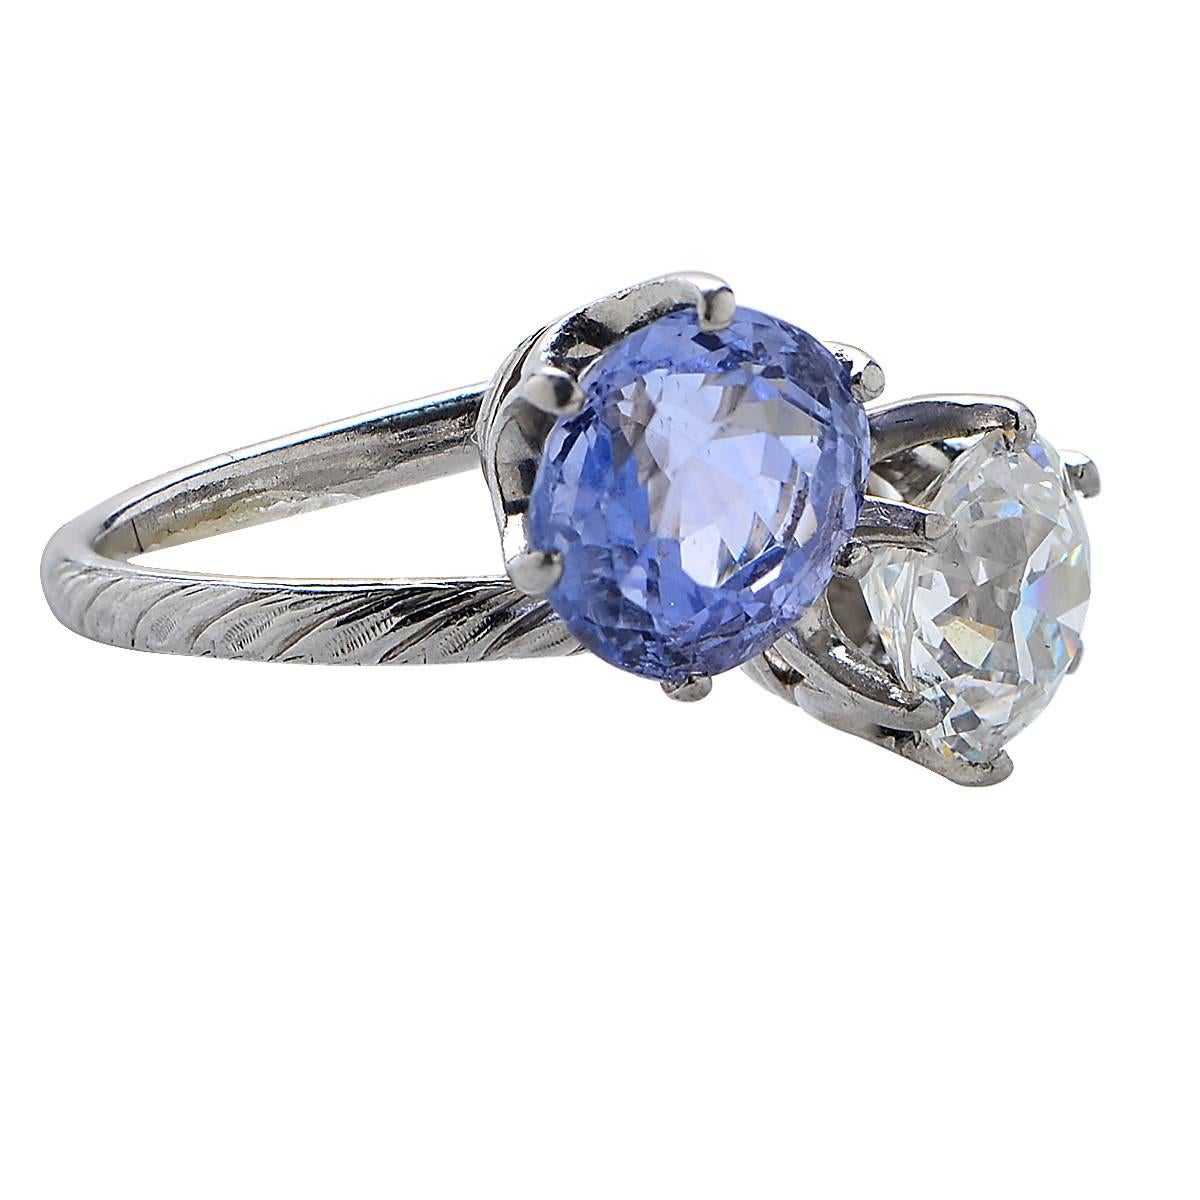 Tiffany & Co. platinum diamond and sapphire bypass ring featuring a GIA graded 1.78ct old European cut diamond, I color, VS2 clarity, and a round cut sapphire with an estimated weight of 2.10cts.

Ring Size: 5.5
Weight: 7.46 grams

This diamond